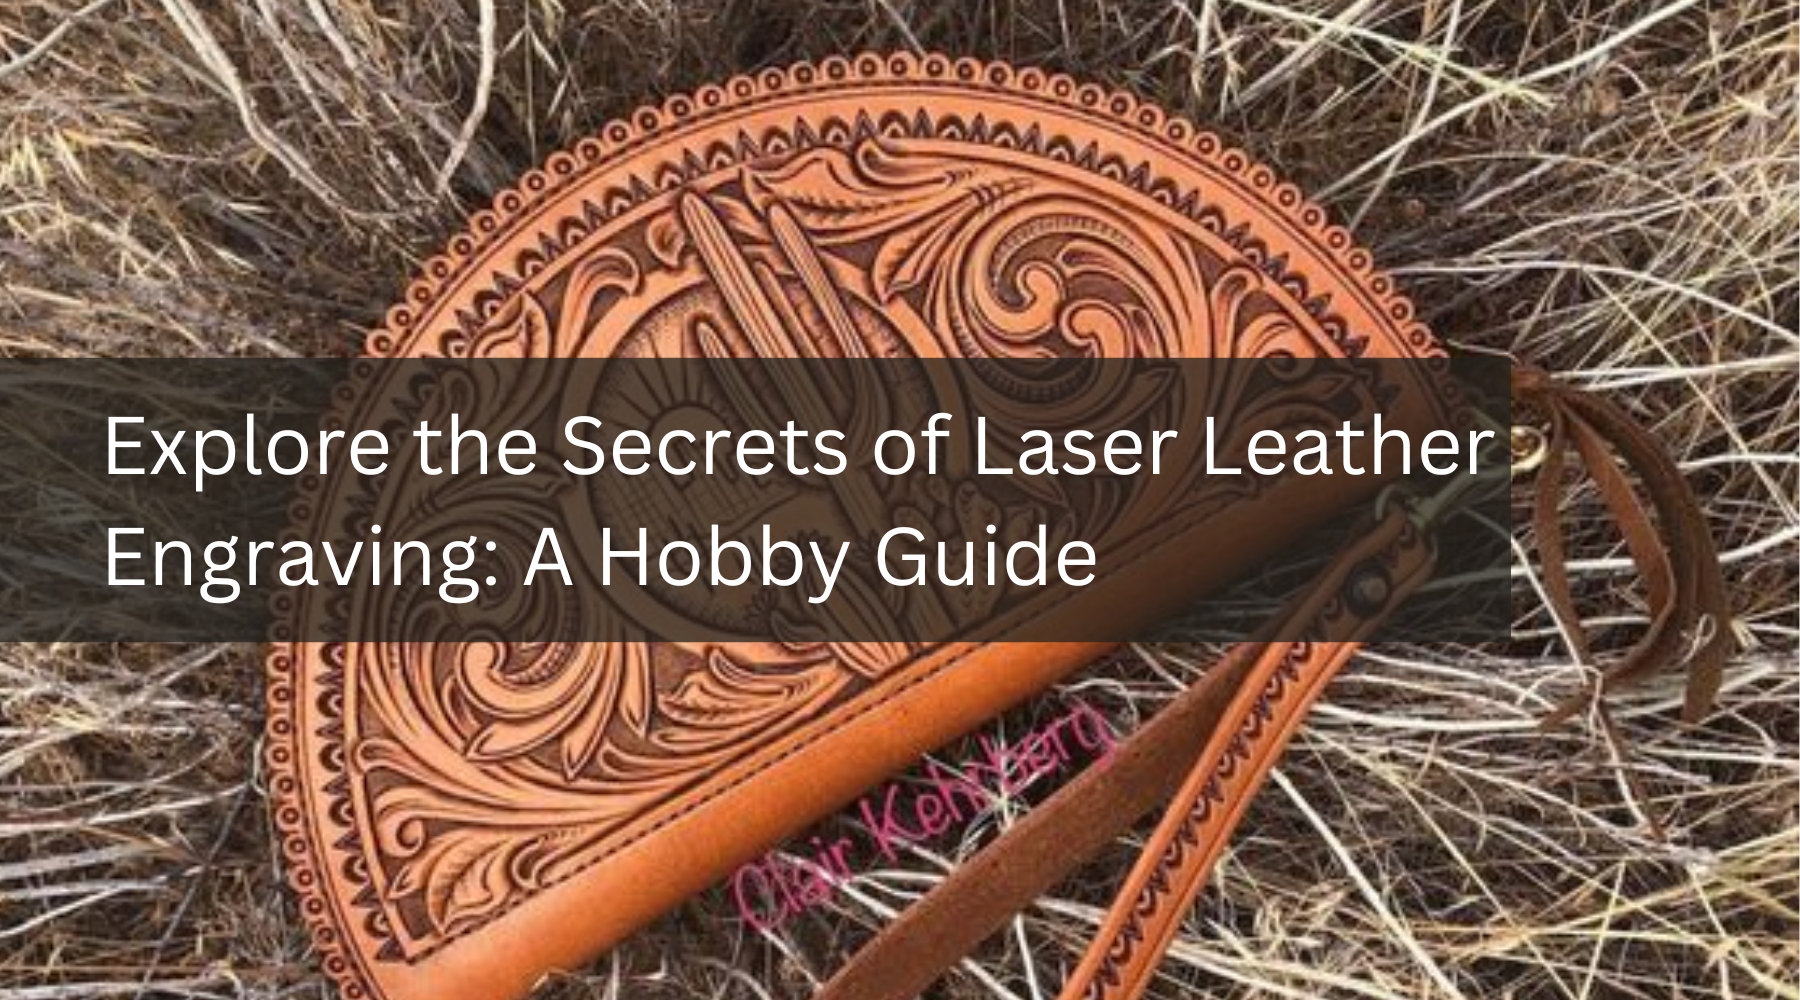 Explore the Secrets of Laser Leather Engraving: A Hobby Guide